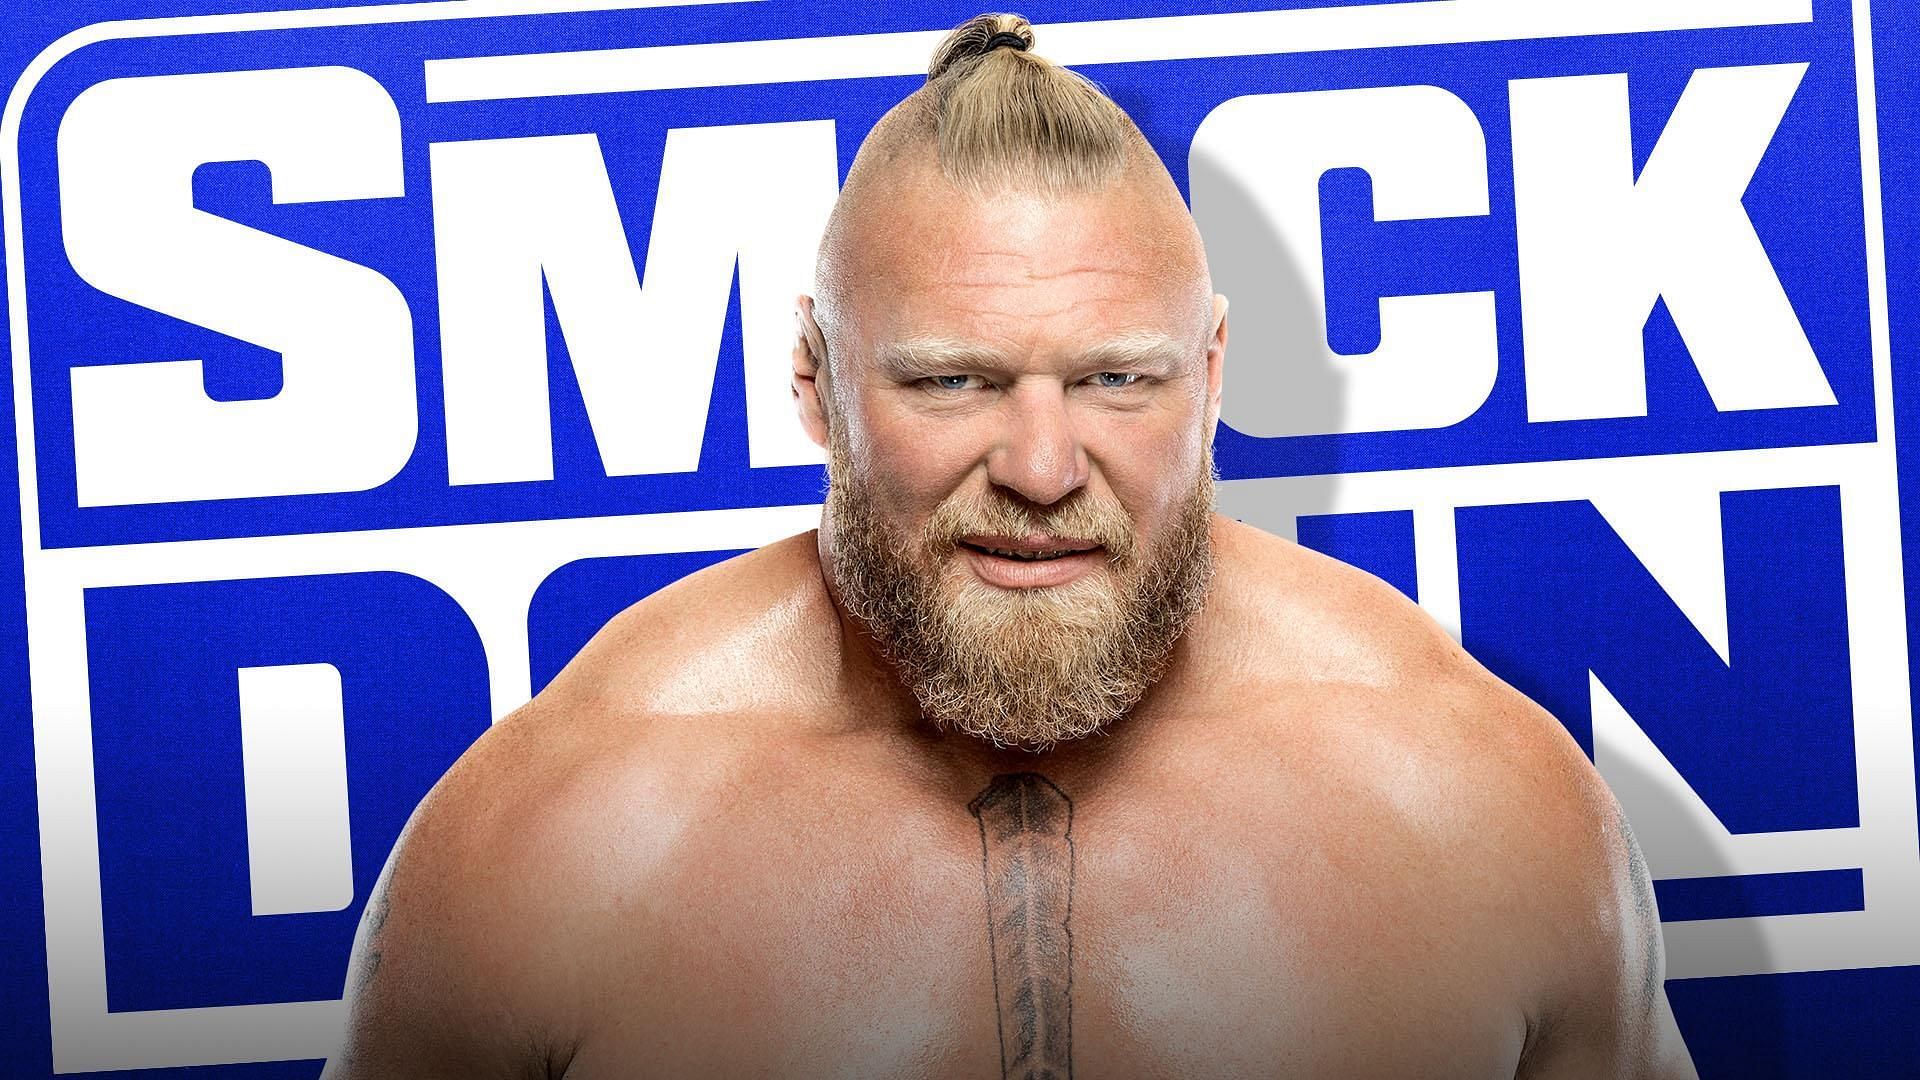 Brock Lesnar returns from suspension on SmackDown this week